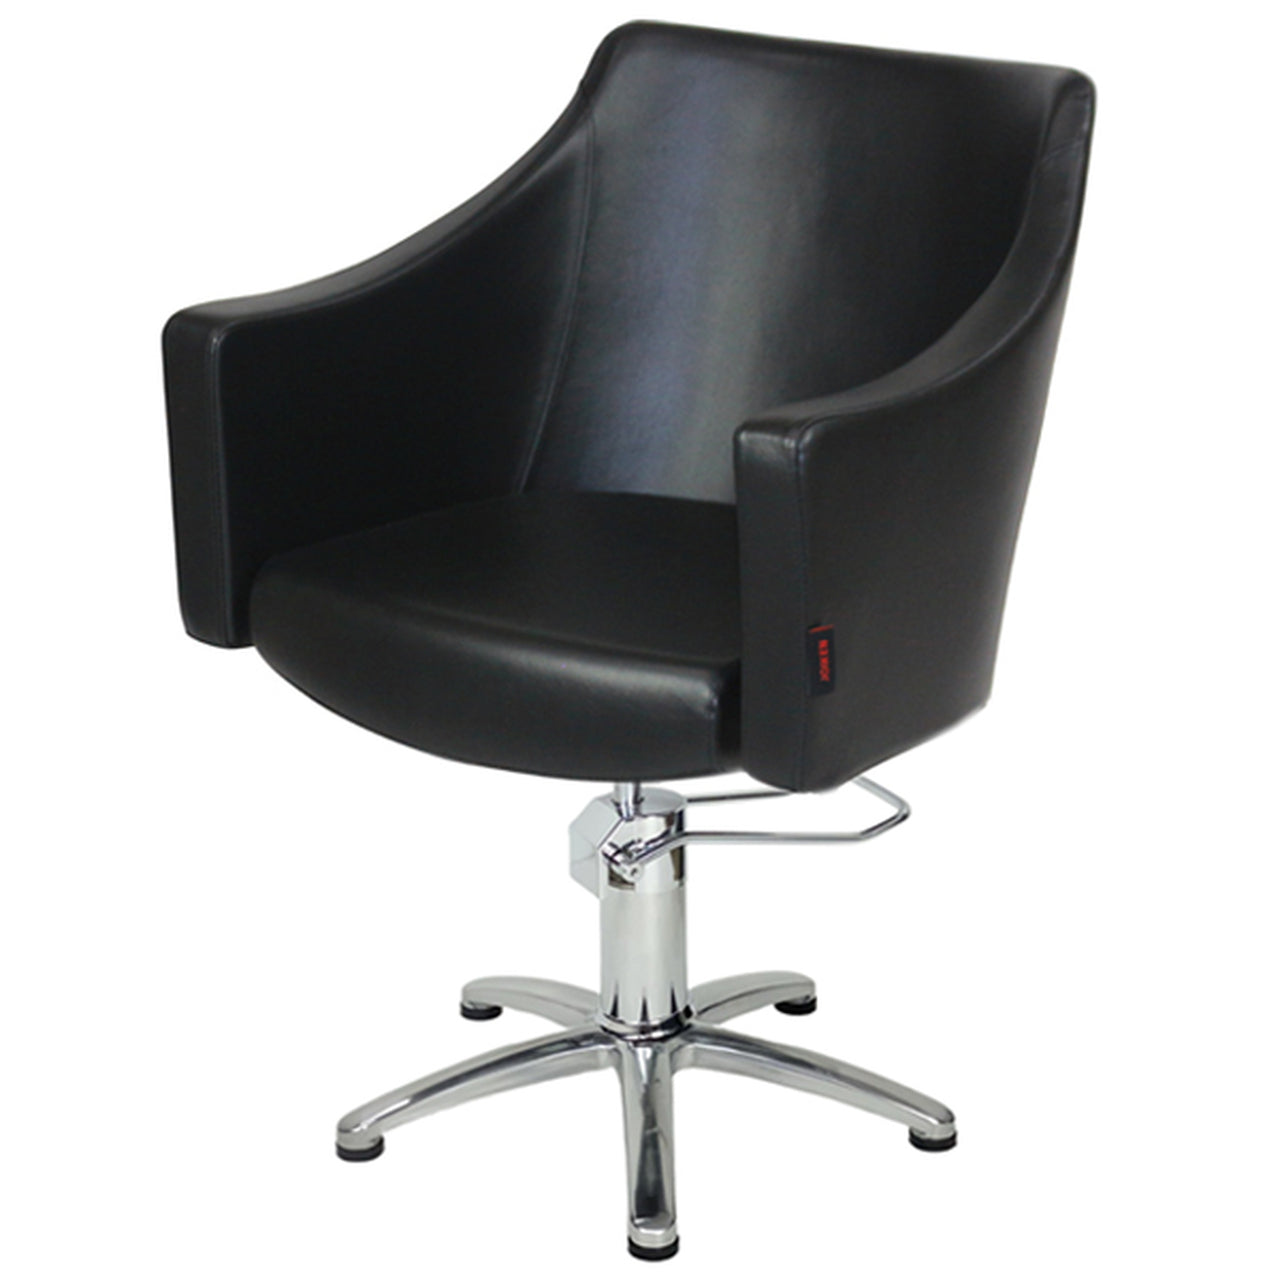 Layla Styling Chair CHROME 5 Star Hydraulic Black Upholstery